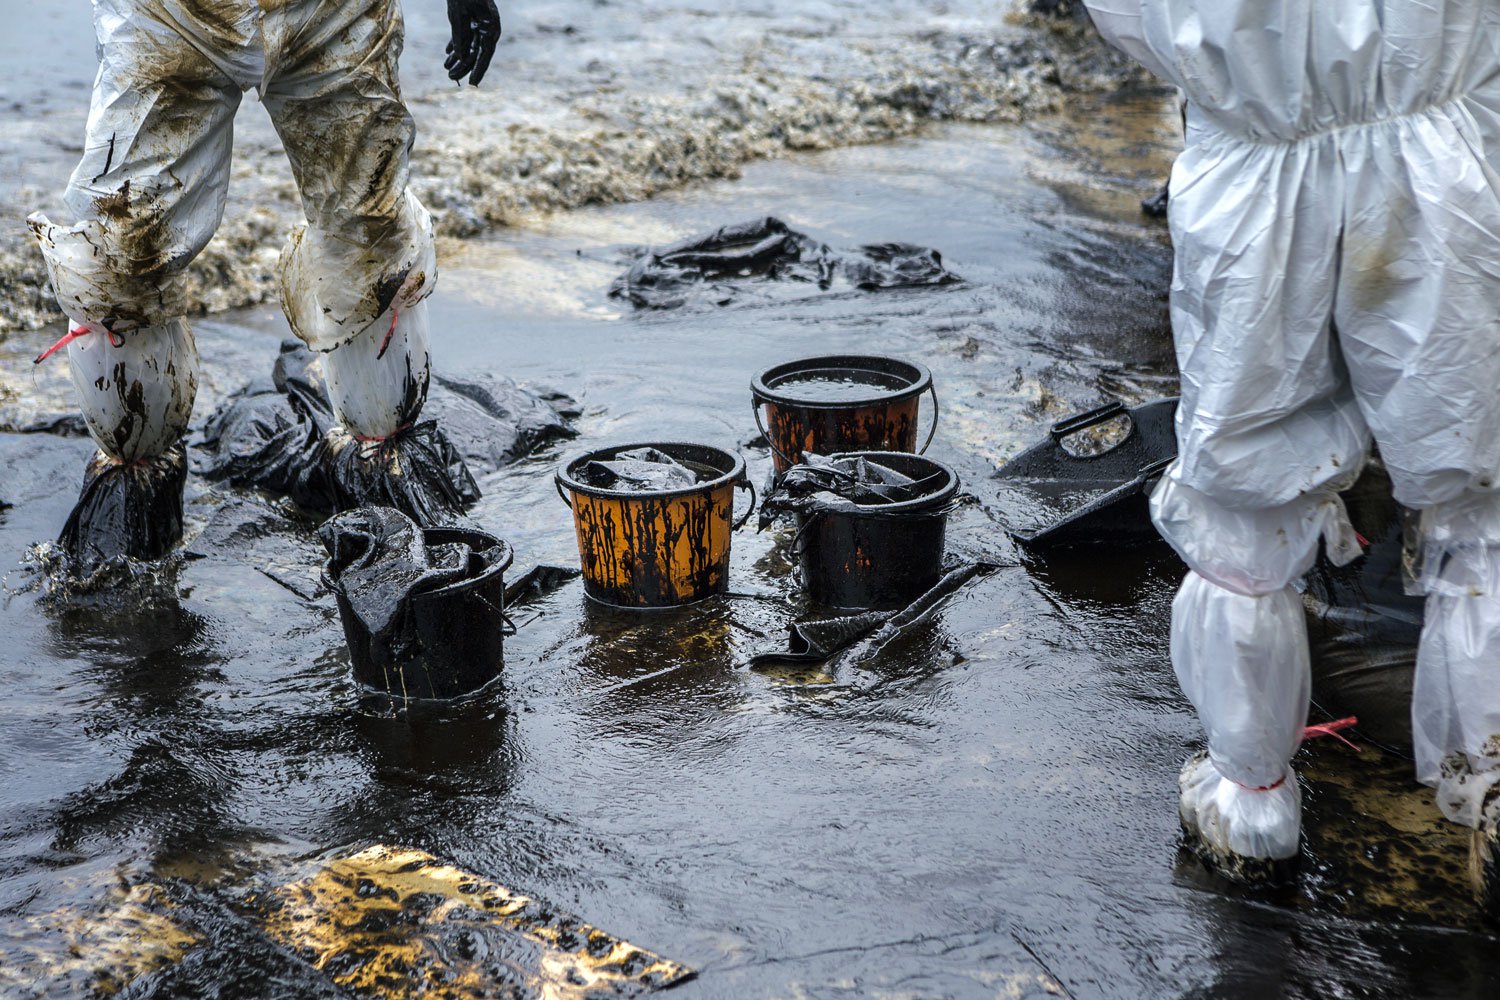 Two people in PPE during oil spill cleanup